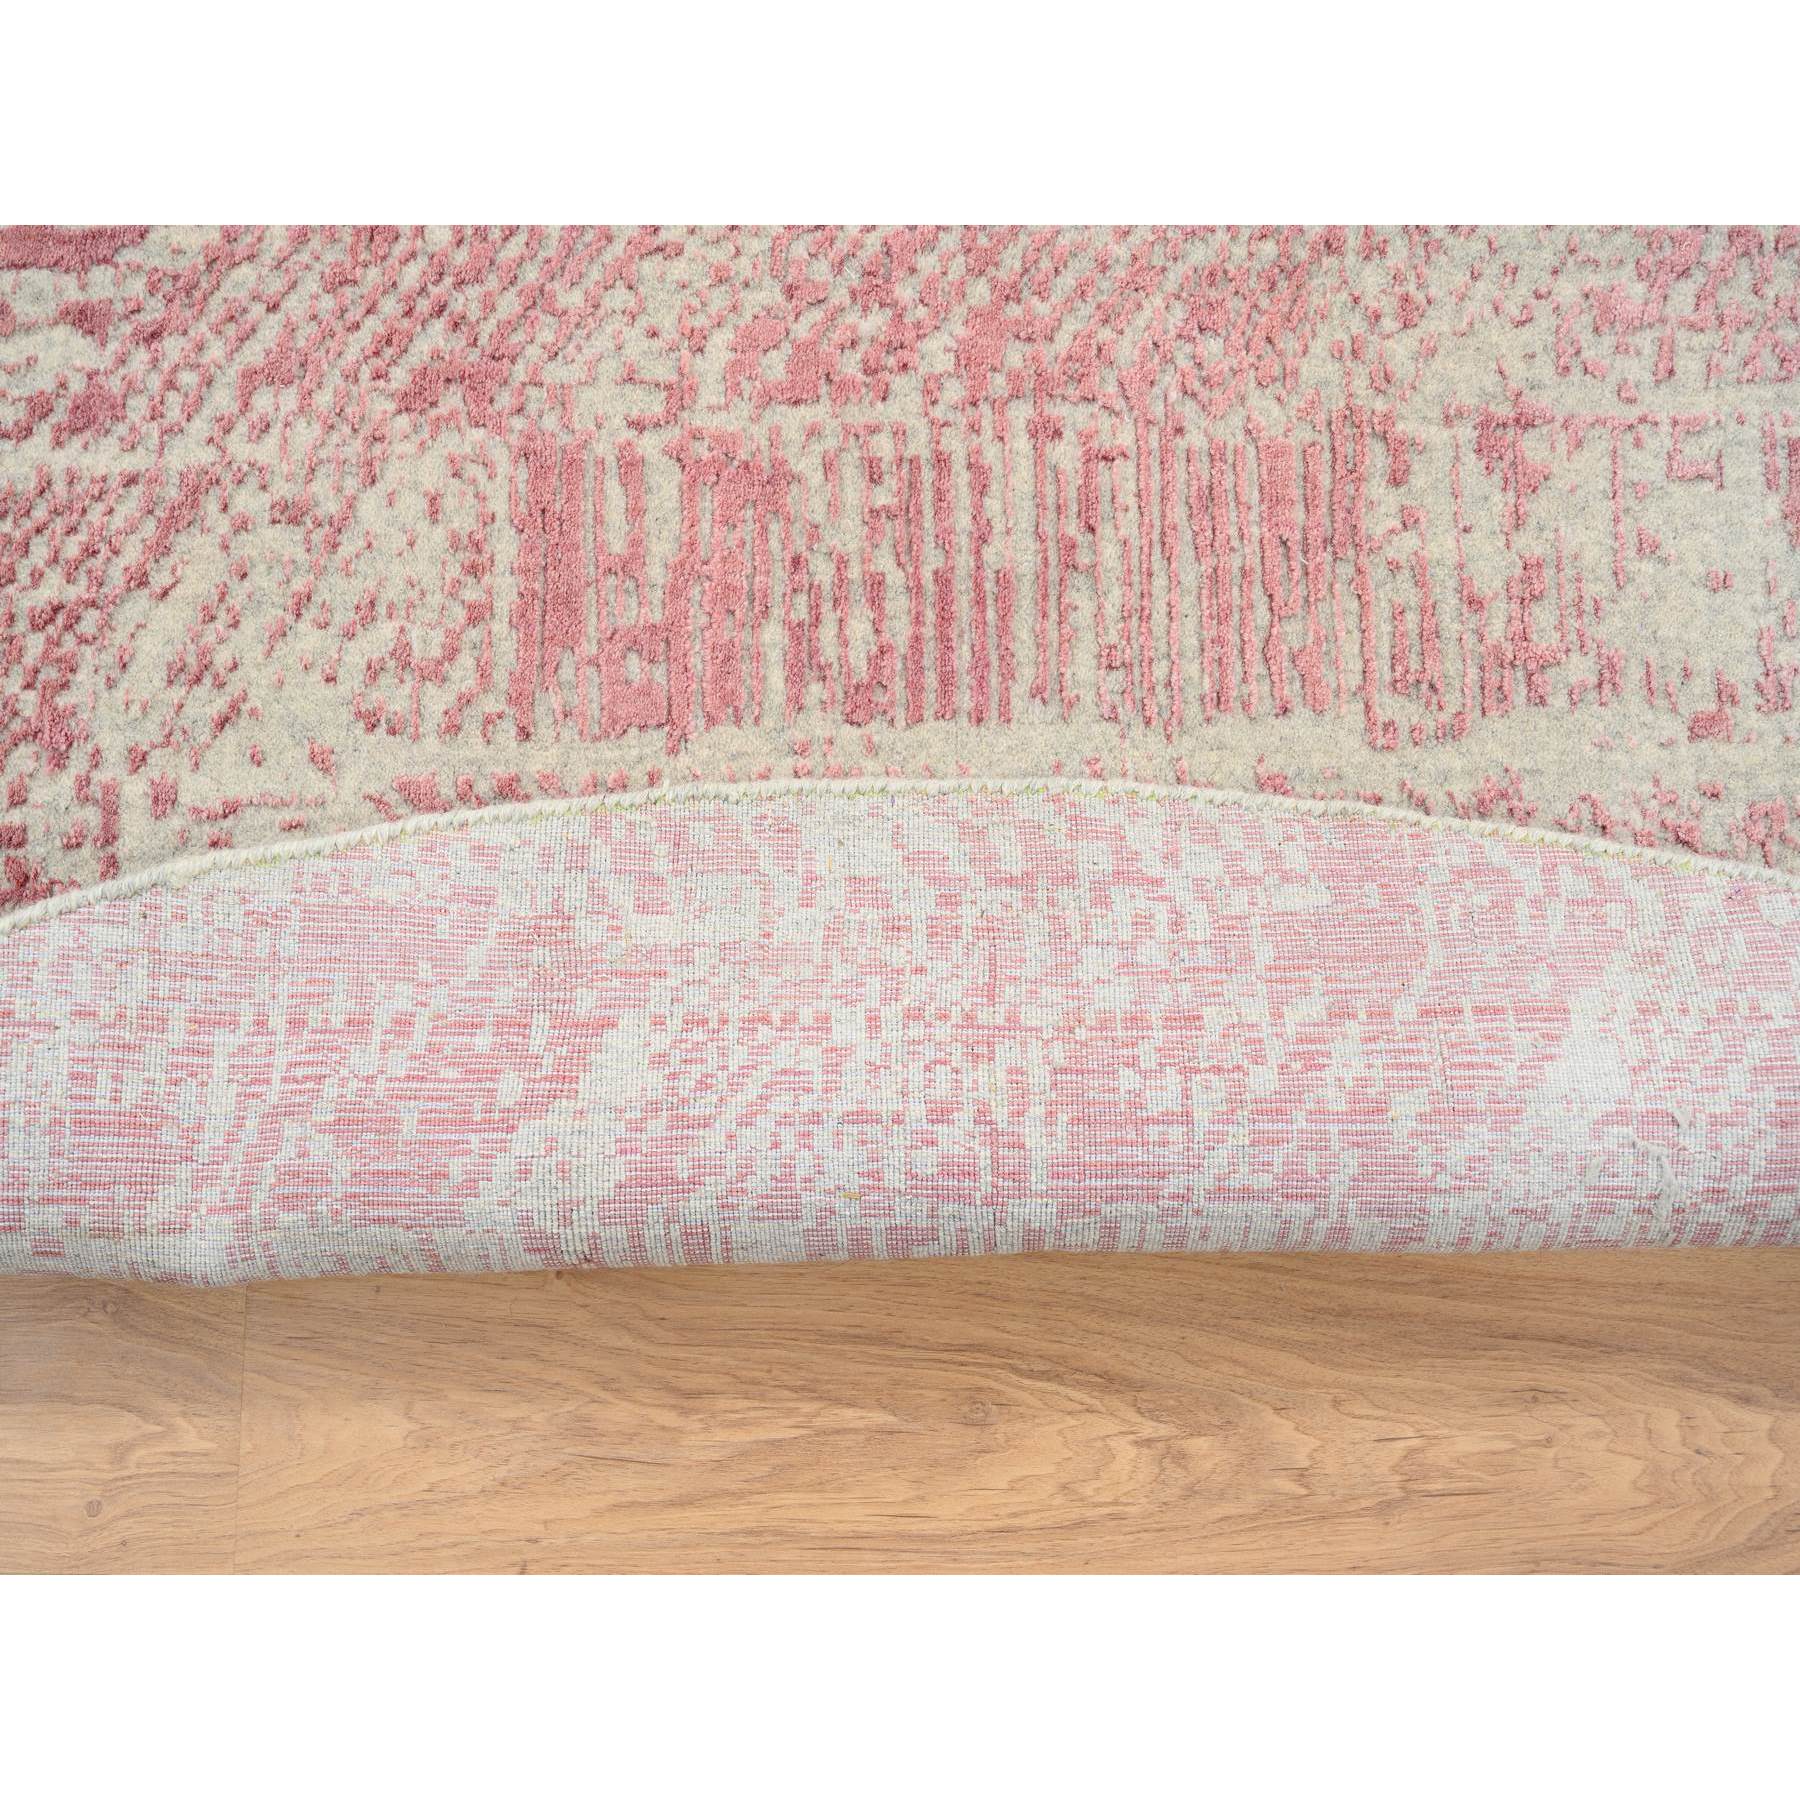 10'x10' Rose Pink, Wool and Art Silk Jacquard Hand Loomed, All Over Design, Round Oriental Rug 